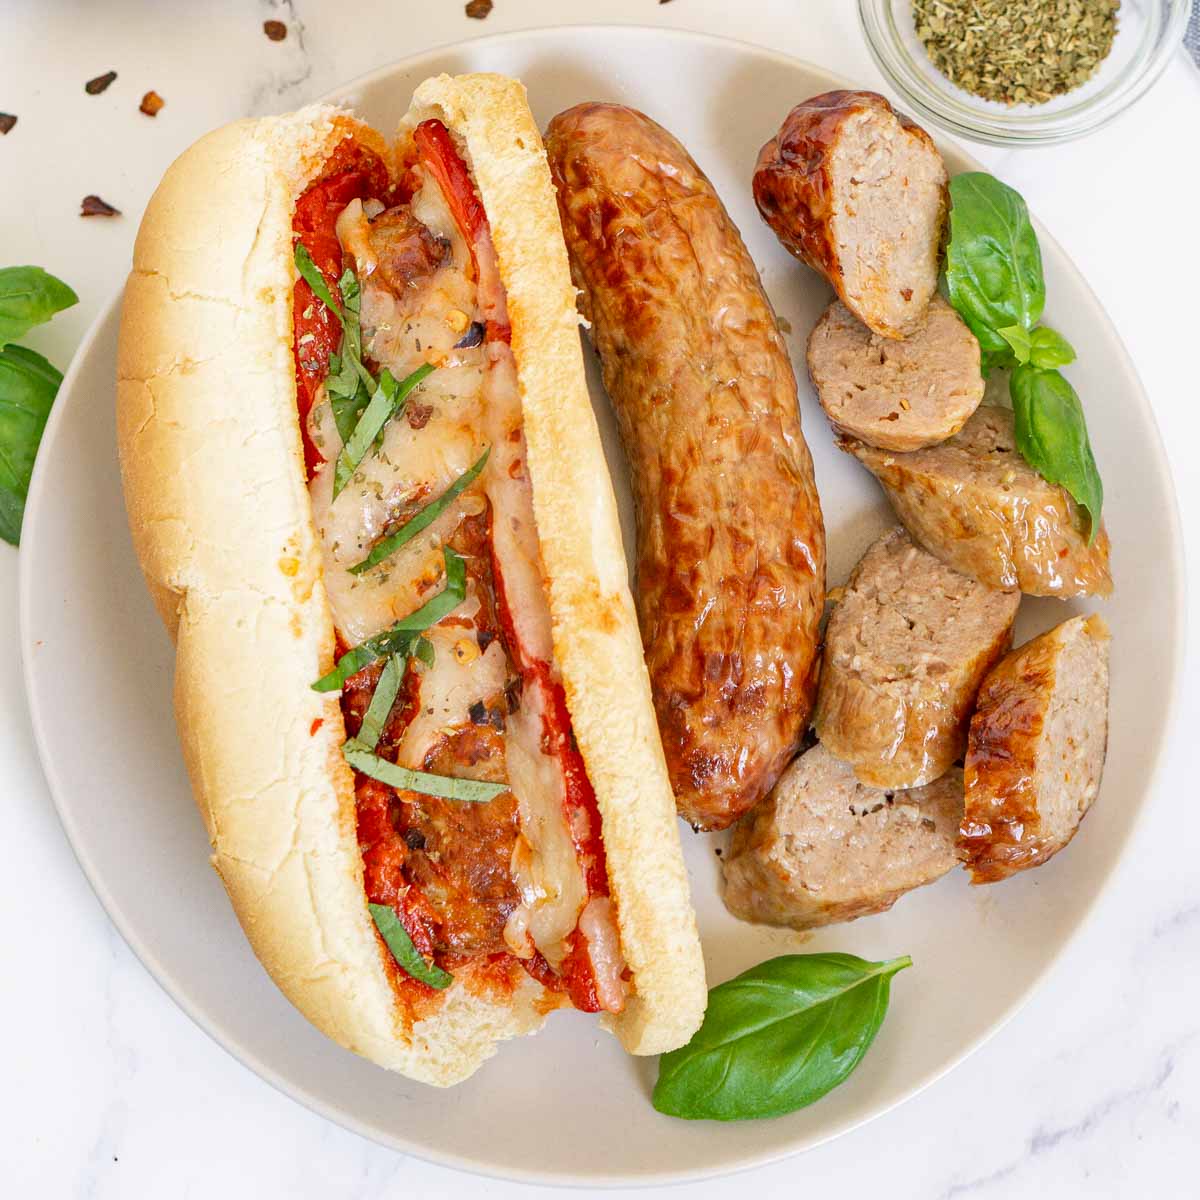 Plate of air fried Italian sausages and Italian sausage sub